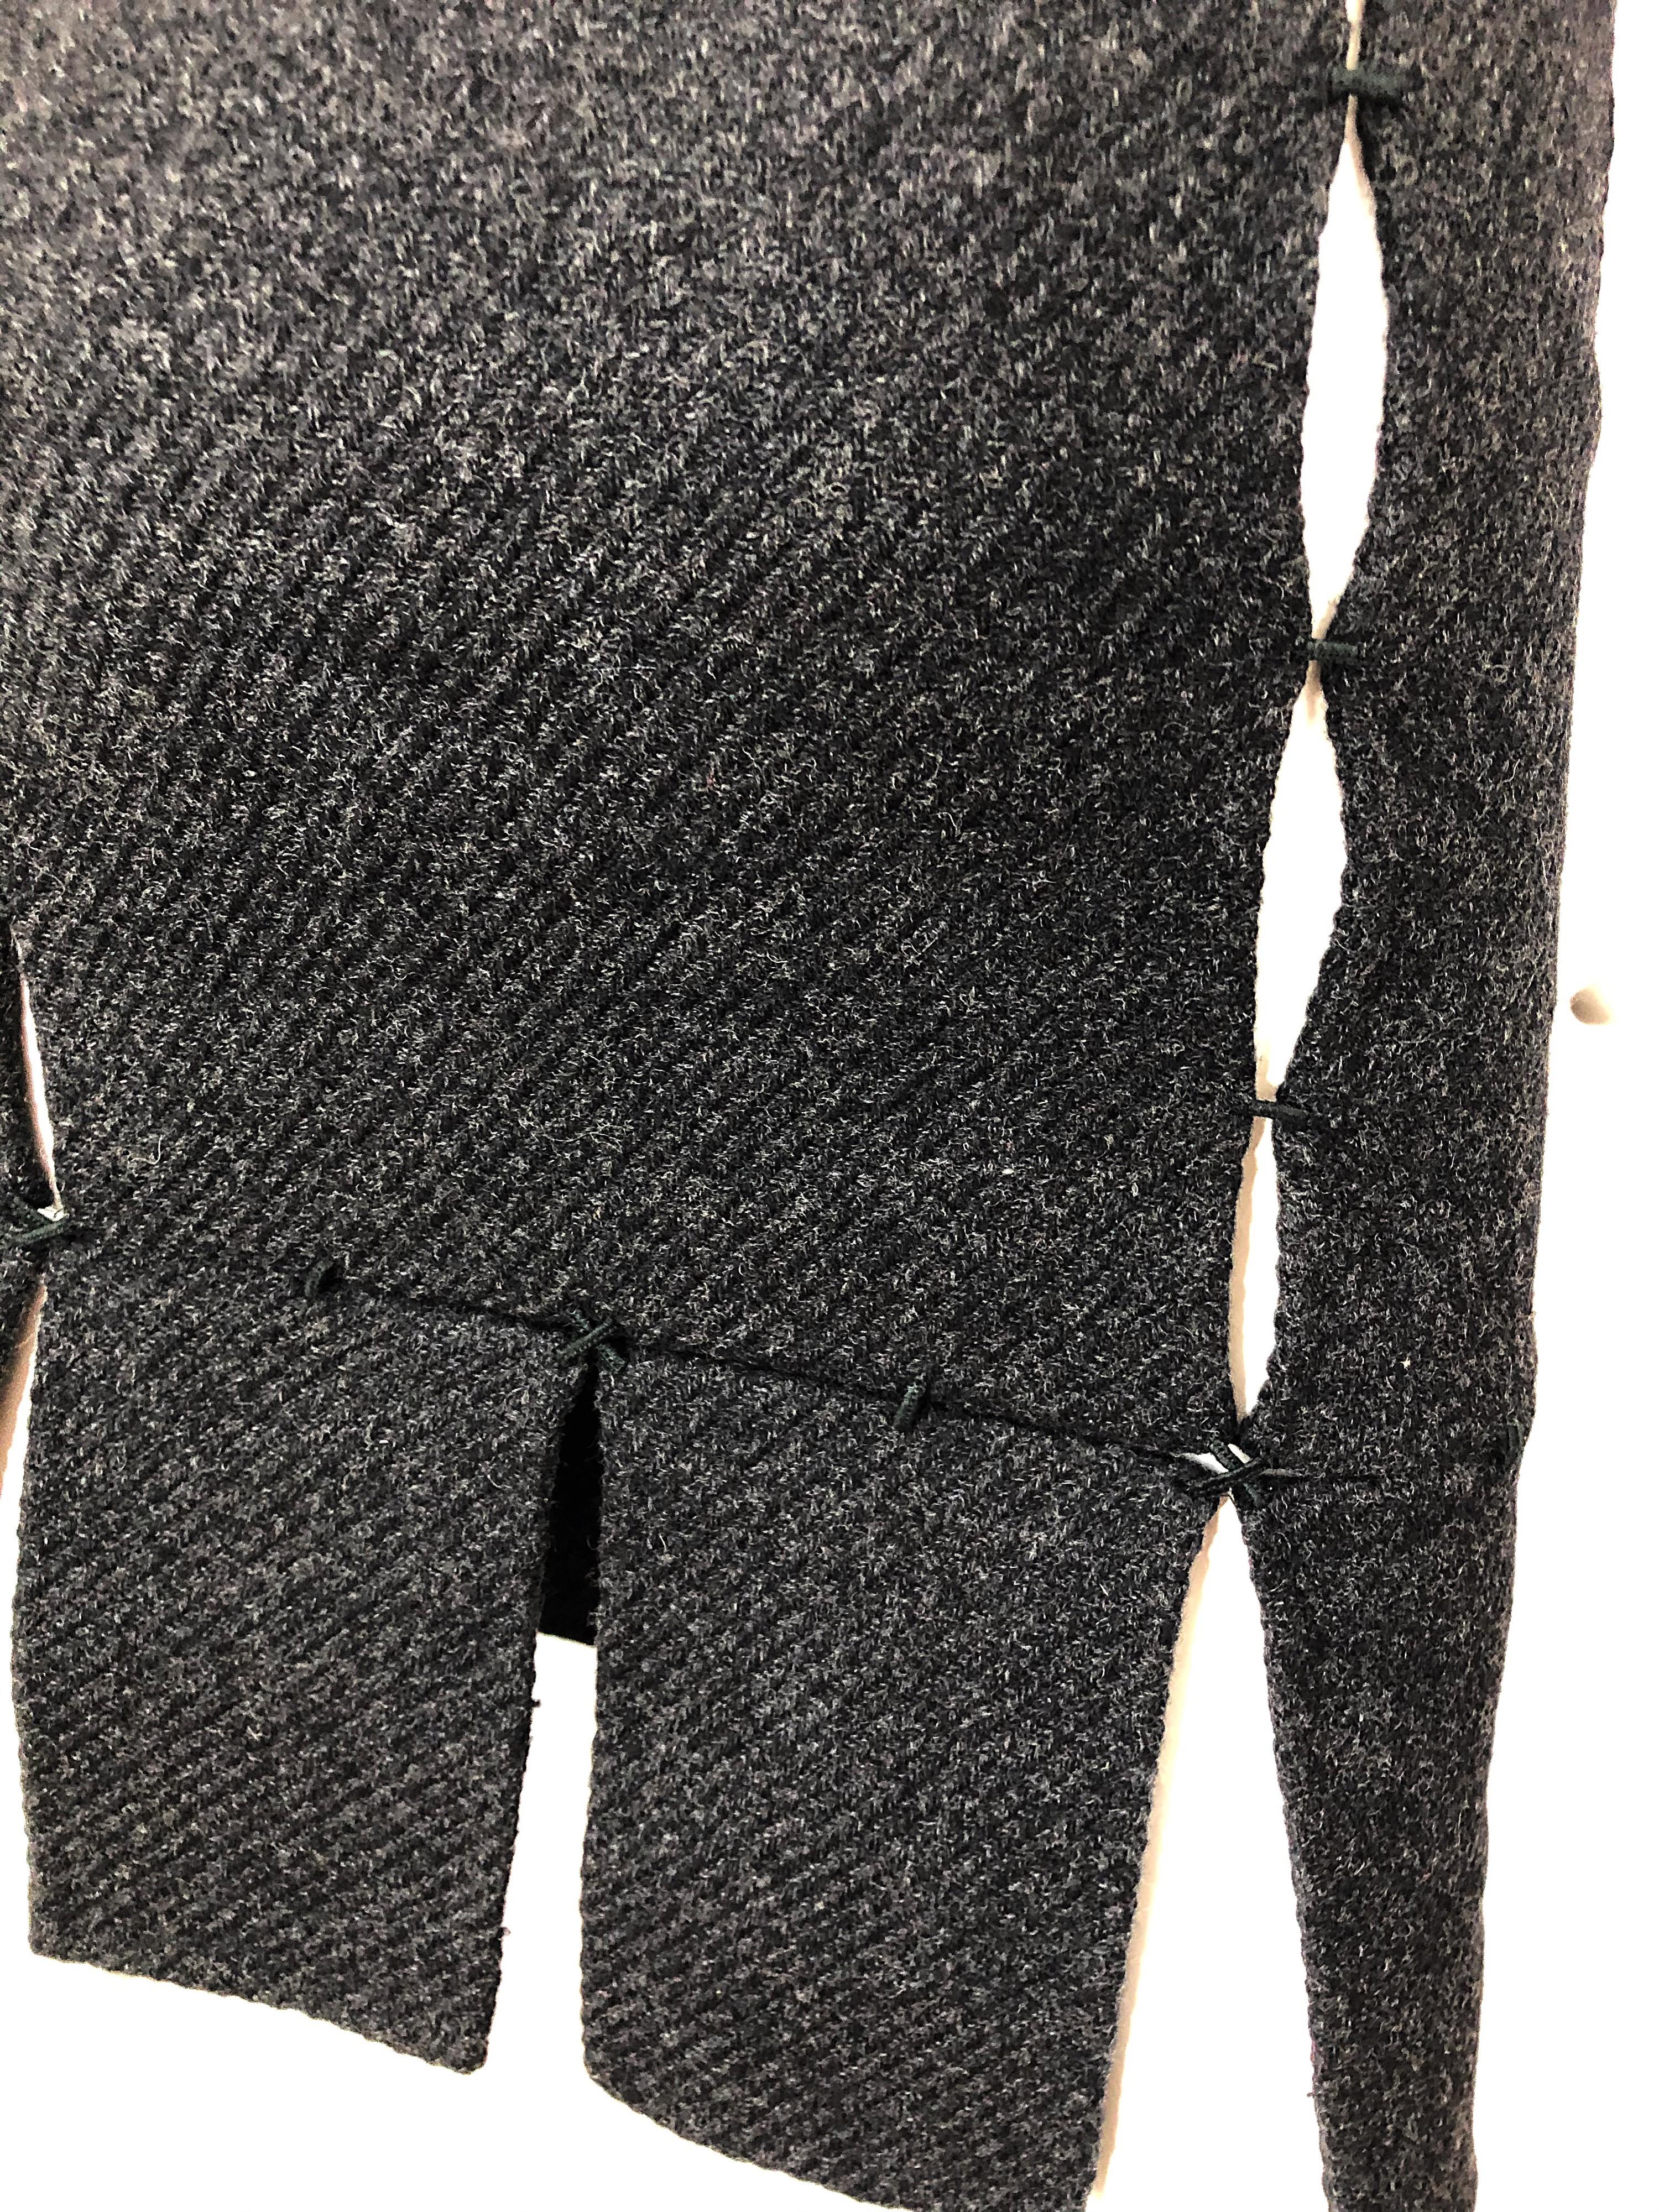 1990s Prada Charcoal Grey Cut - Out High Waisted Wool Vintage 90s Pencil Skirt 1